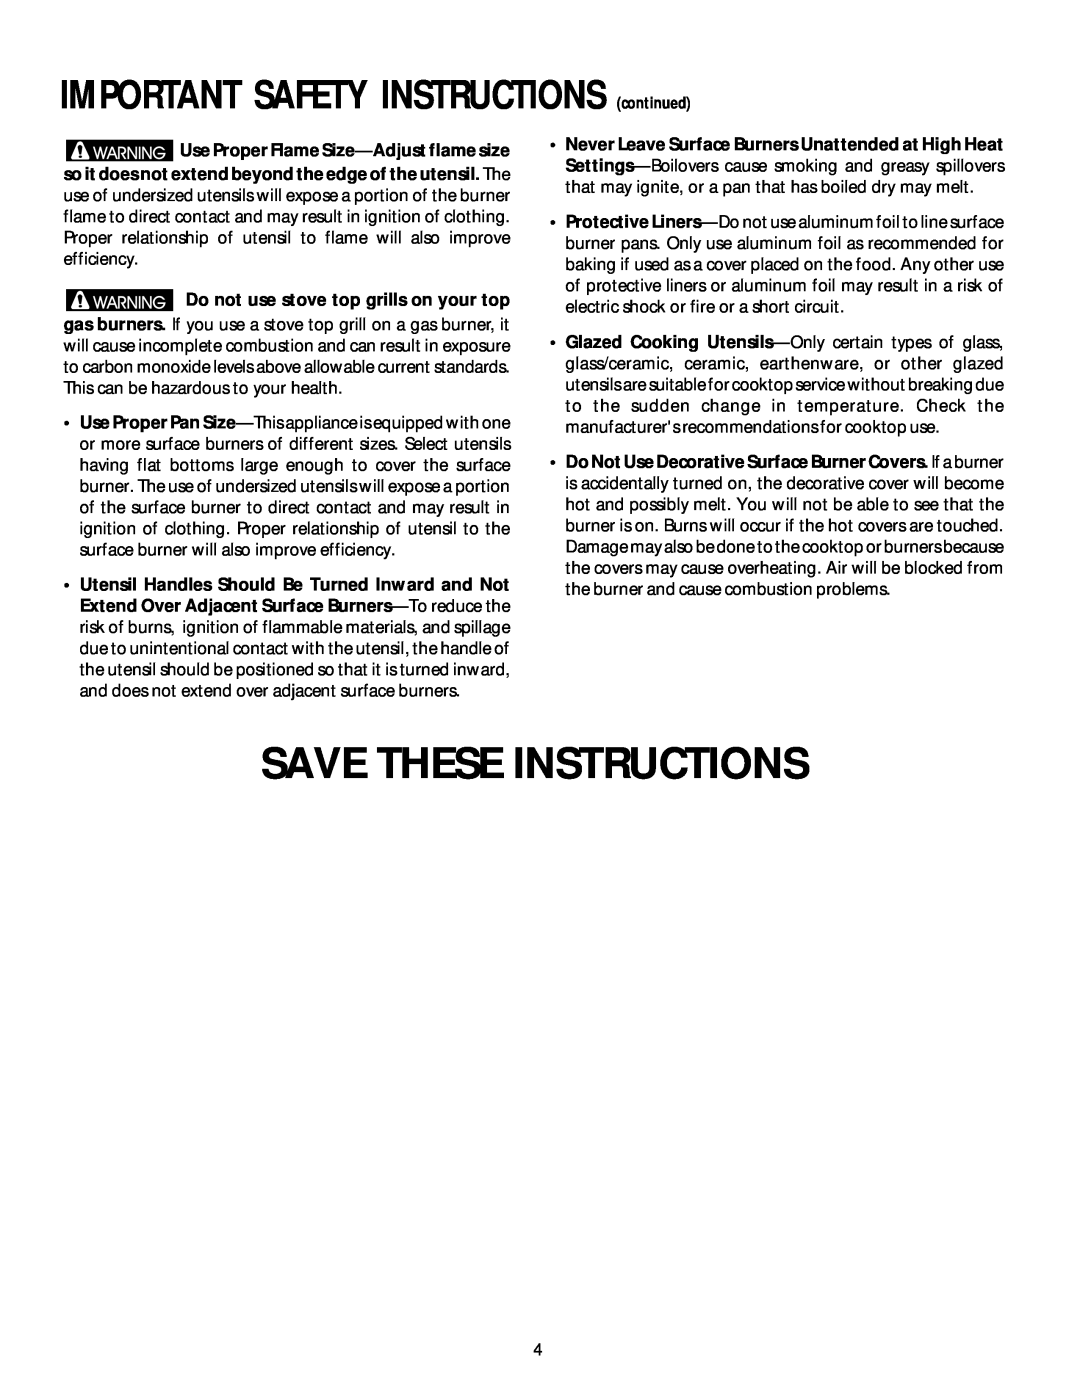 Frigidaire 318068140 manual Save These Instructions, IMPORTANT SAFETY INSTRUCTIONS continued 